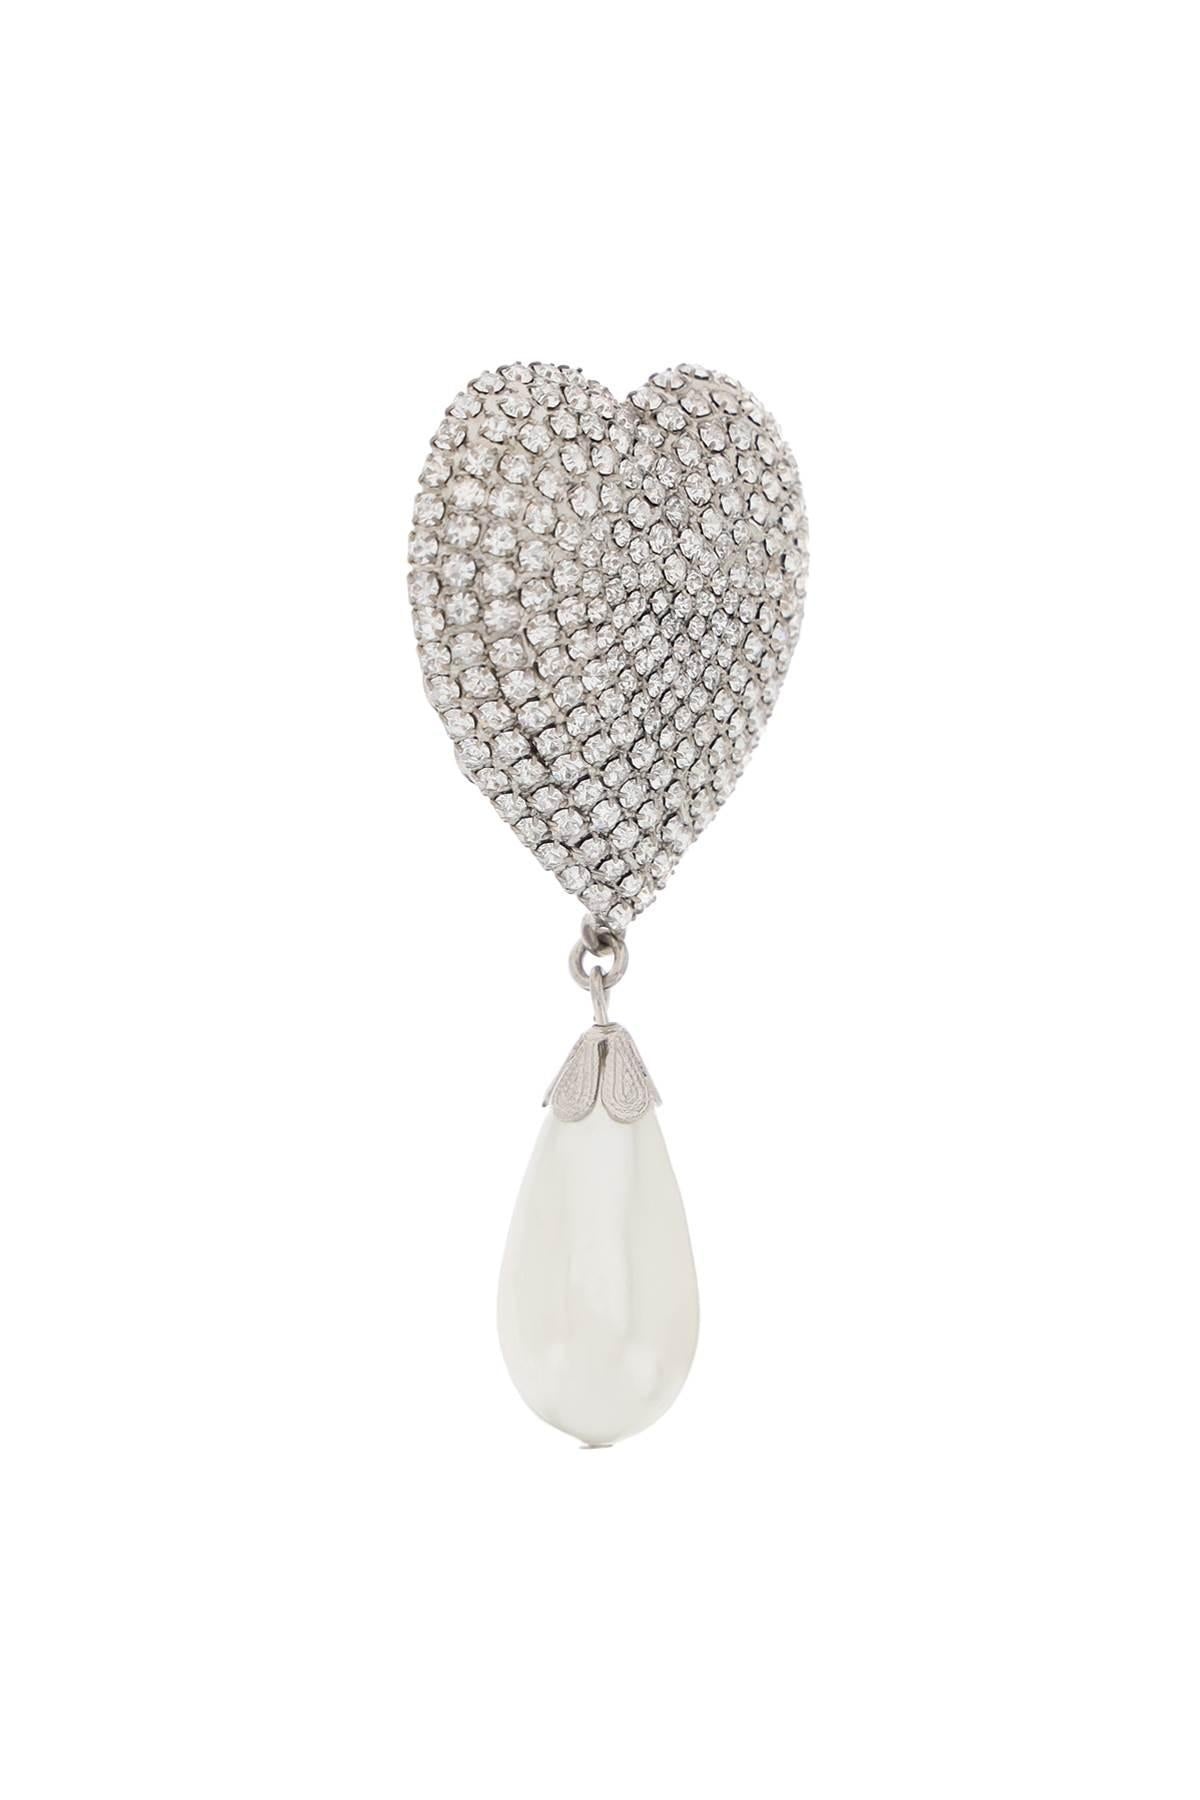 HEART CRYSTAL EARRINGS WITH PEARLS - 4